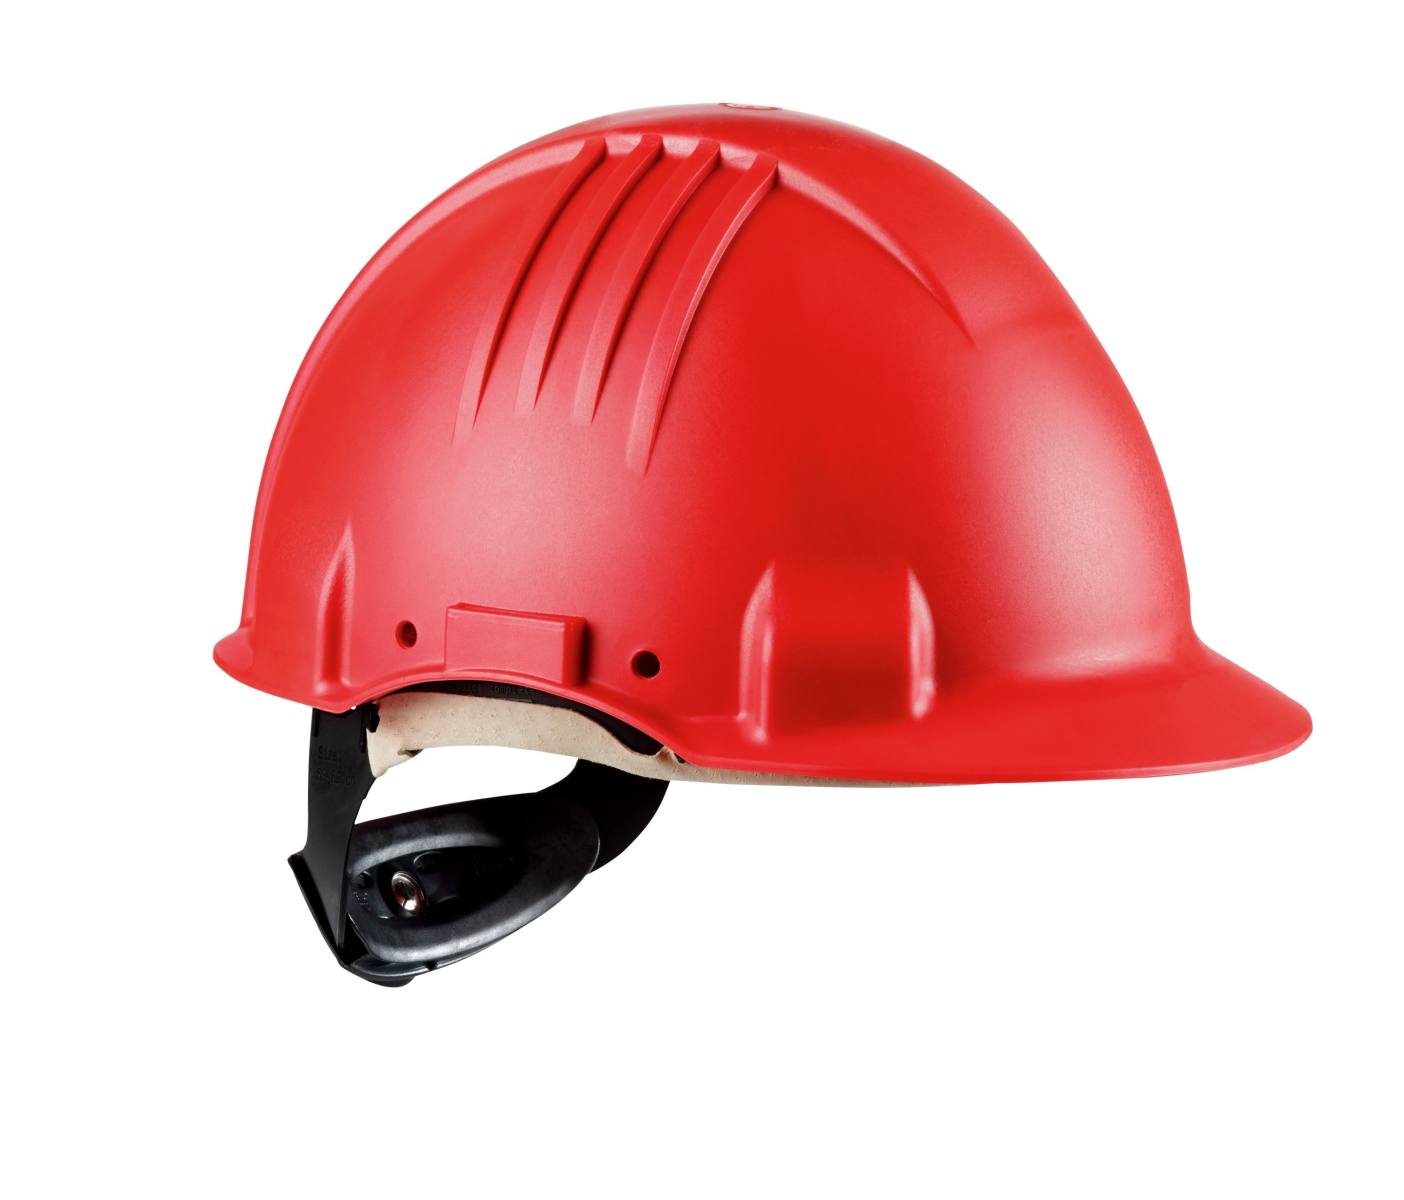 3M High-temperature safety helmet, ratchet fastening, non-ventilated, dielectric 1000 V, leather sweatband, red, G3501M-RD